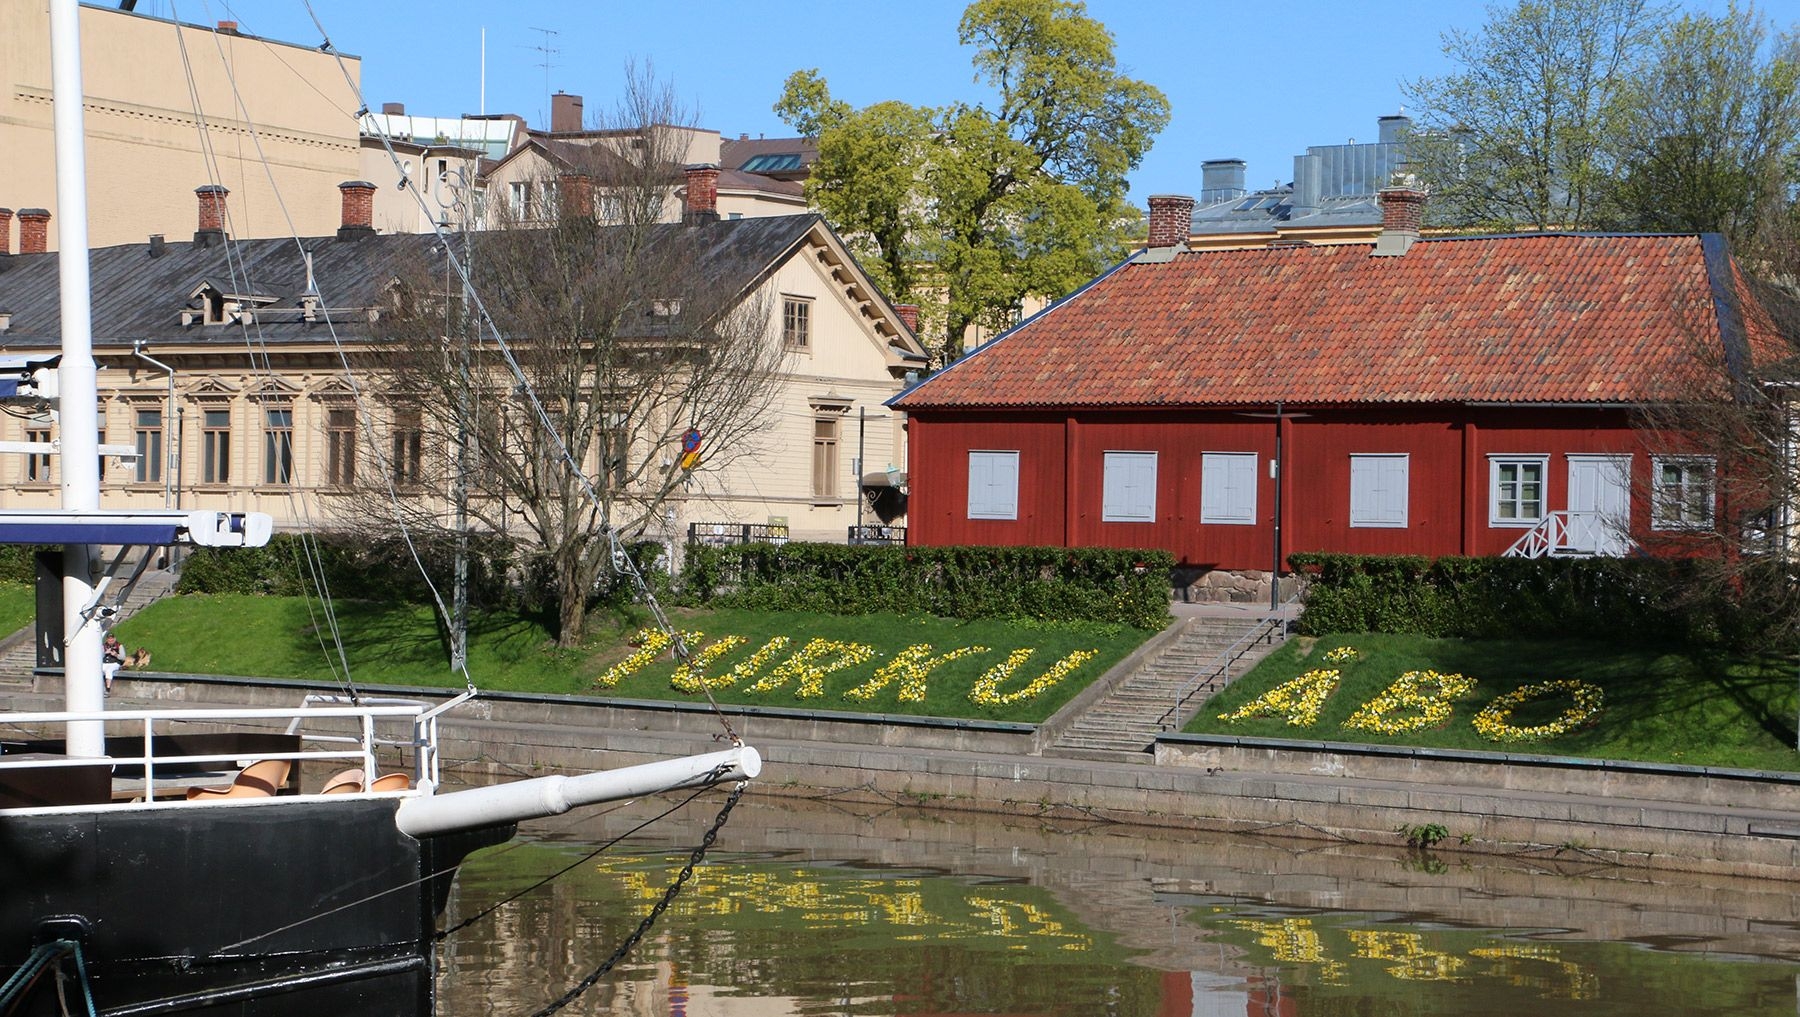 Spring flowers spell out Turku and Åbo on the banks of the Aura River.